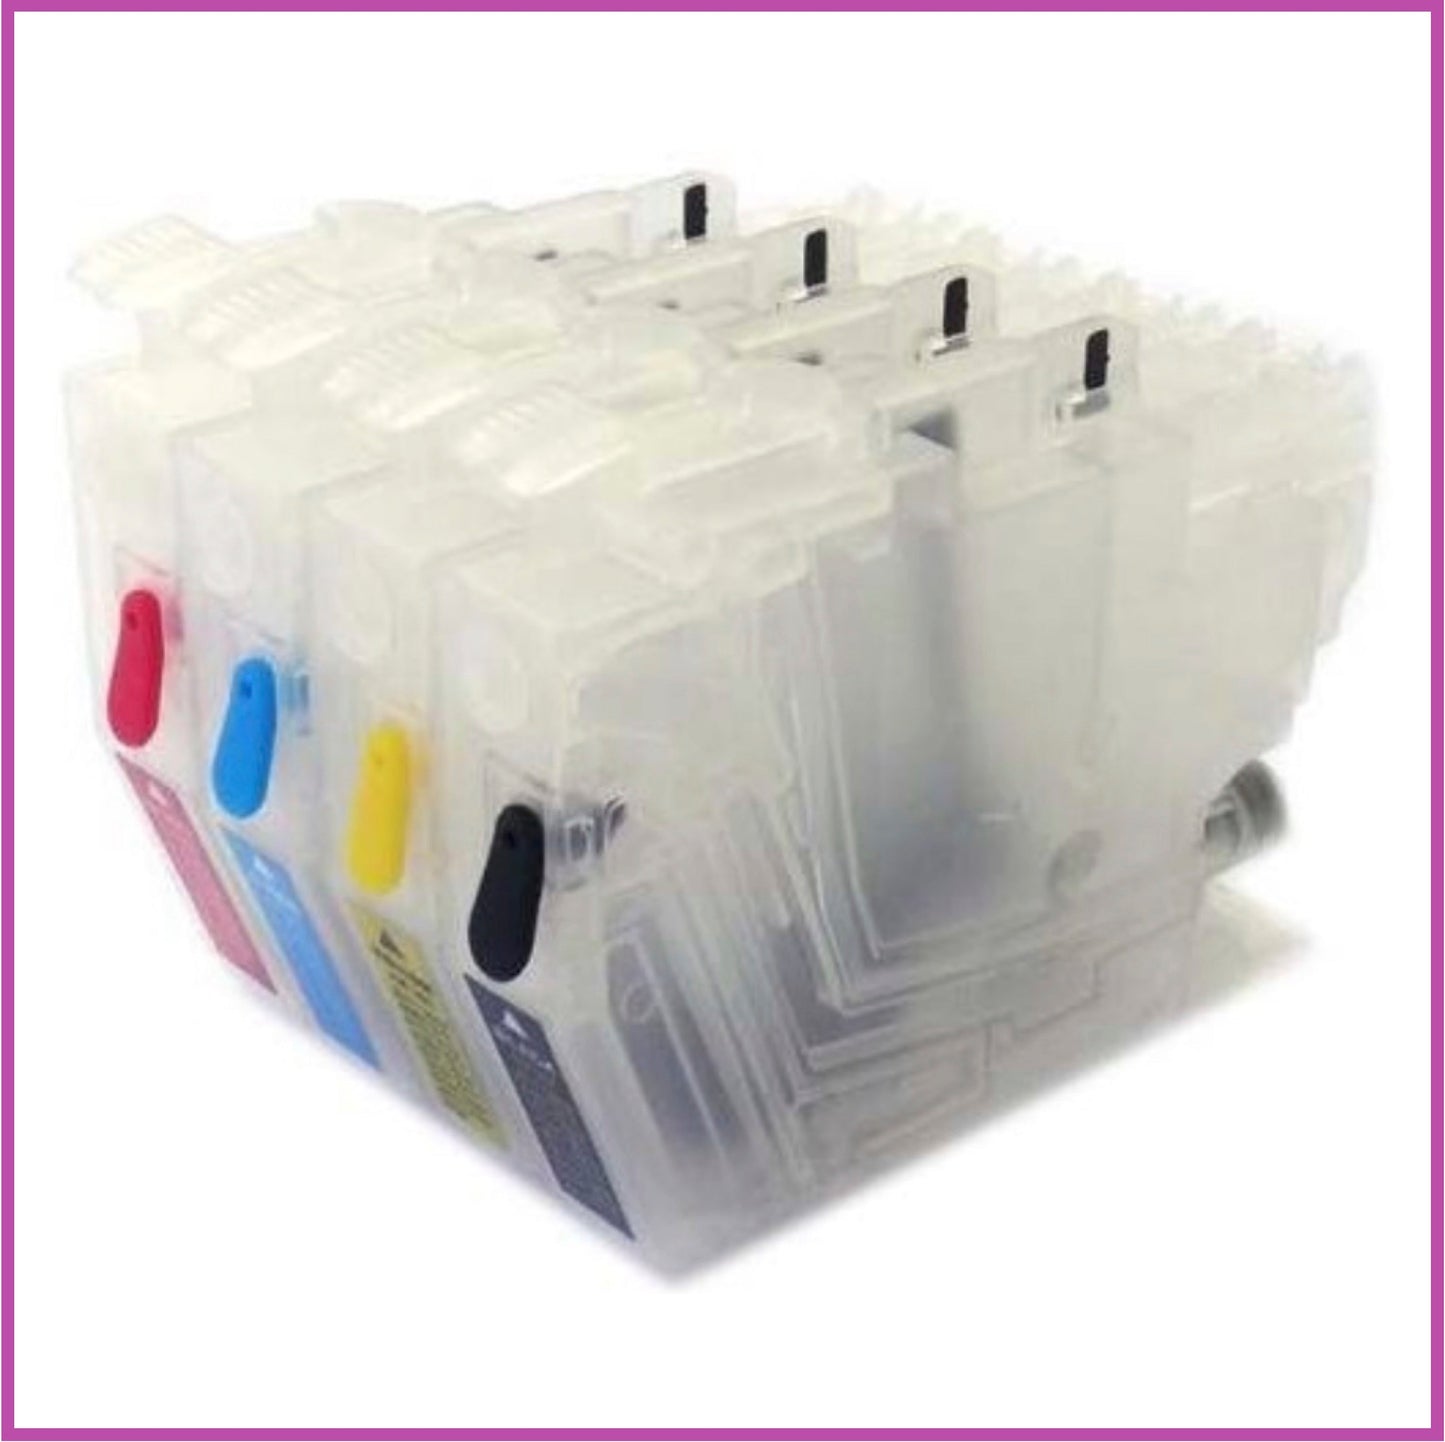 Refillable 3211XL Cartridges for Brother